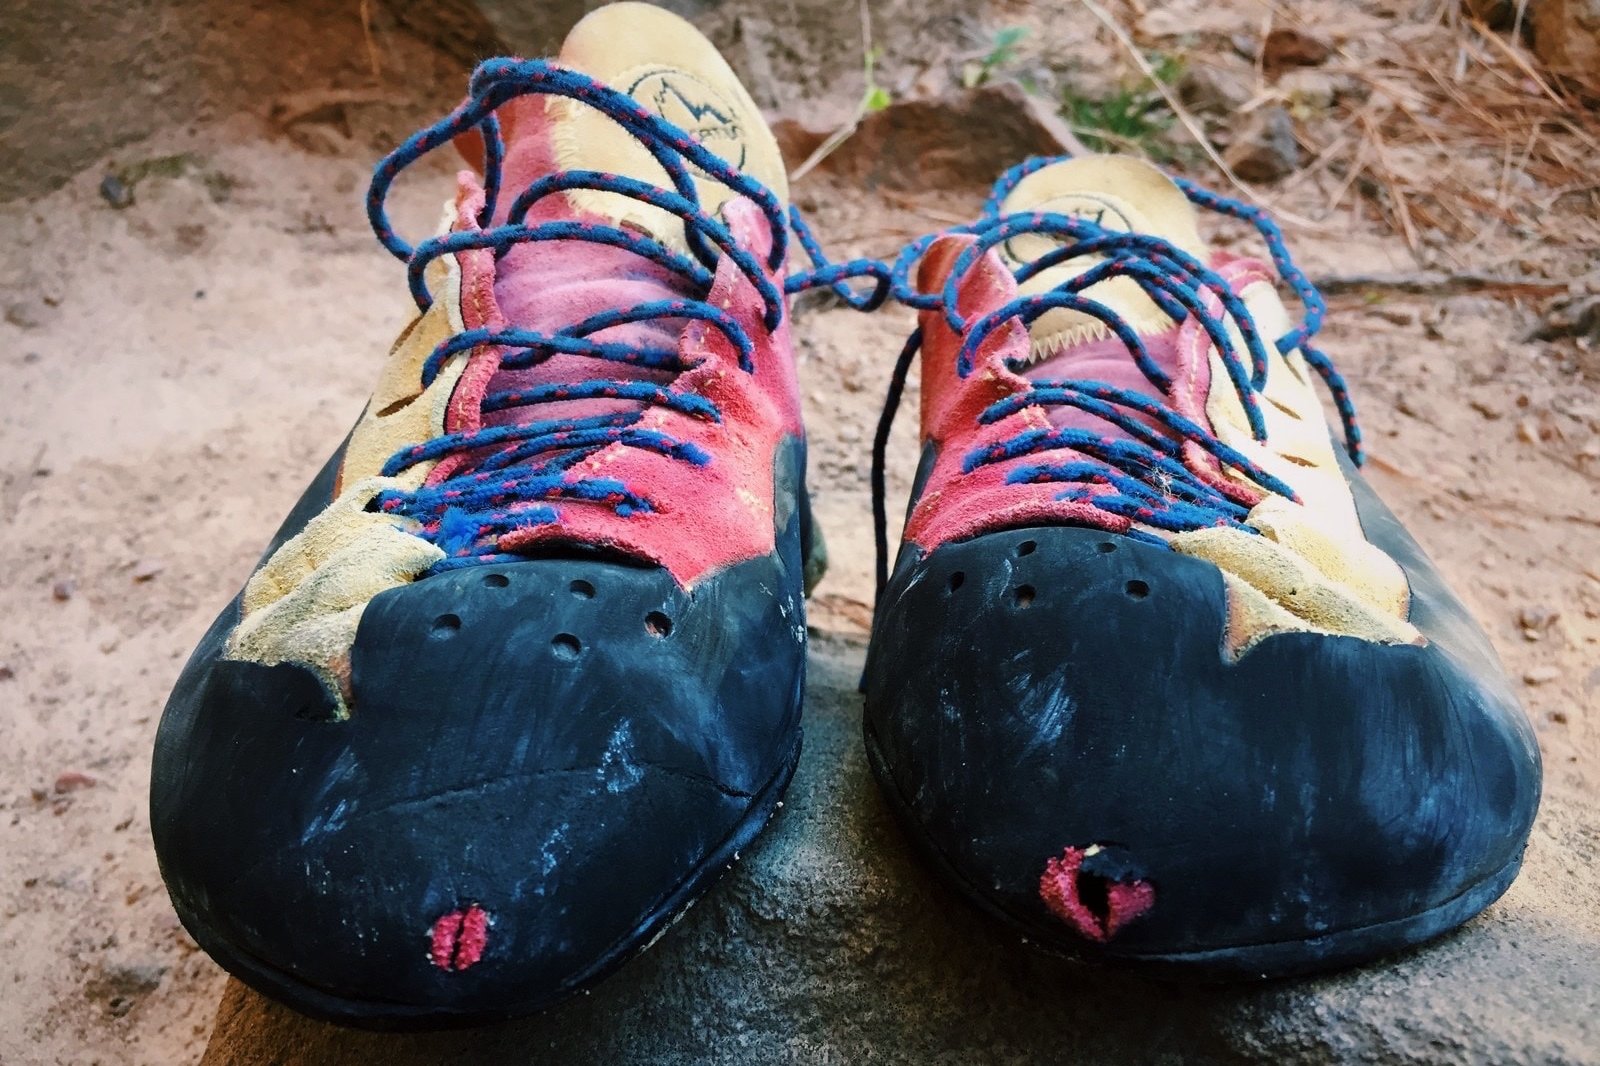 Climbing Shoe Resoling: the Good, the Bad, and How to Get It Done